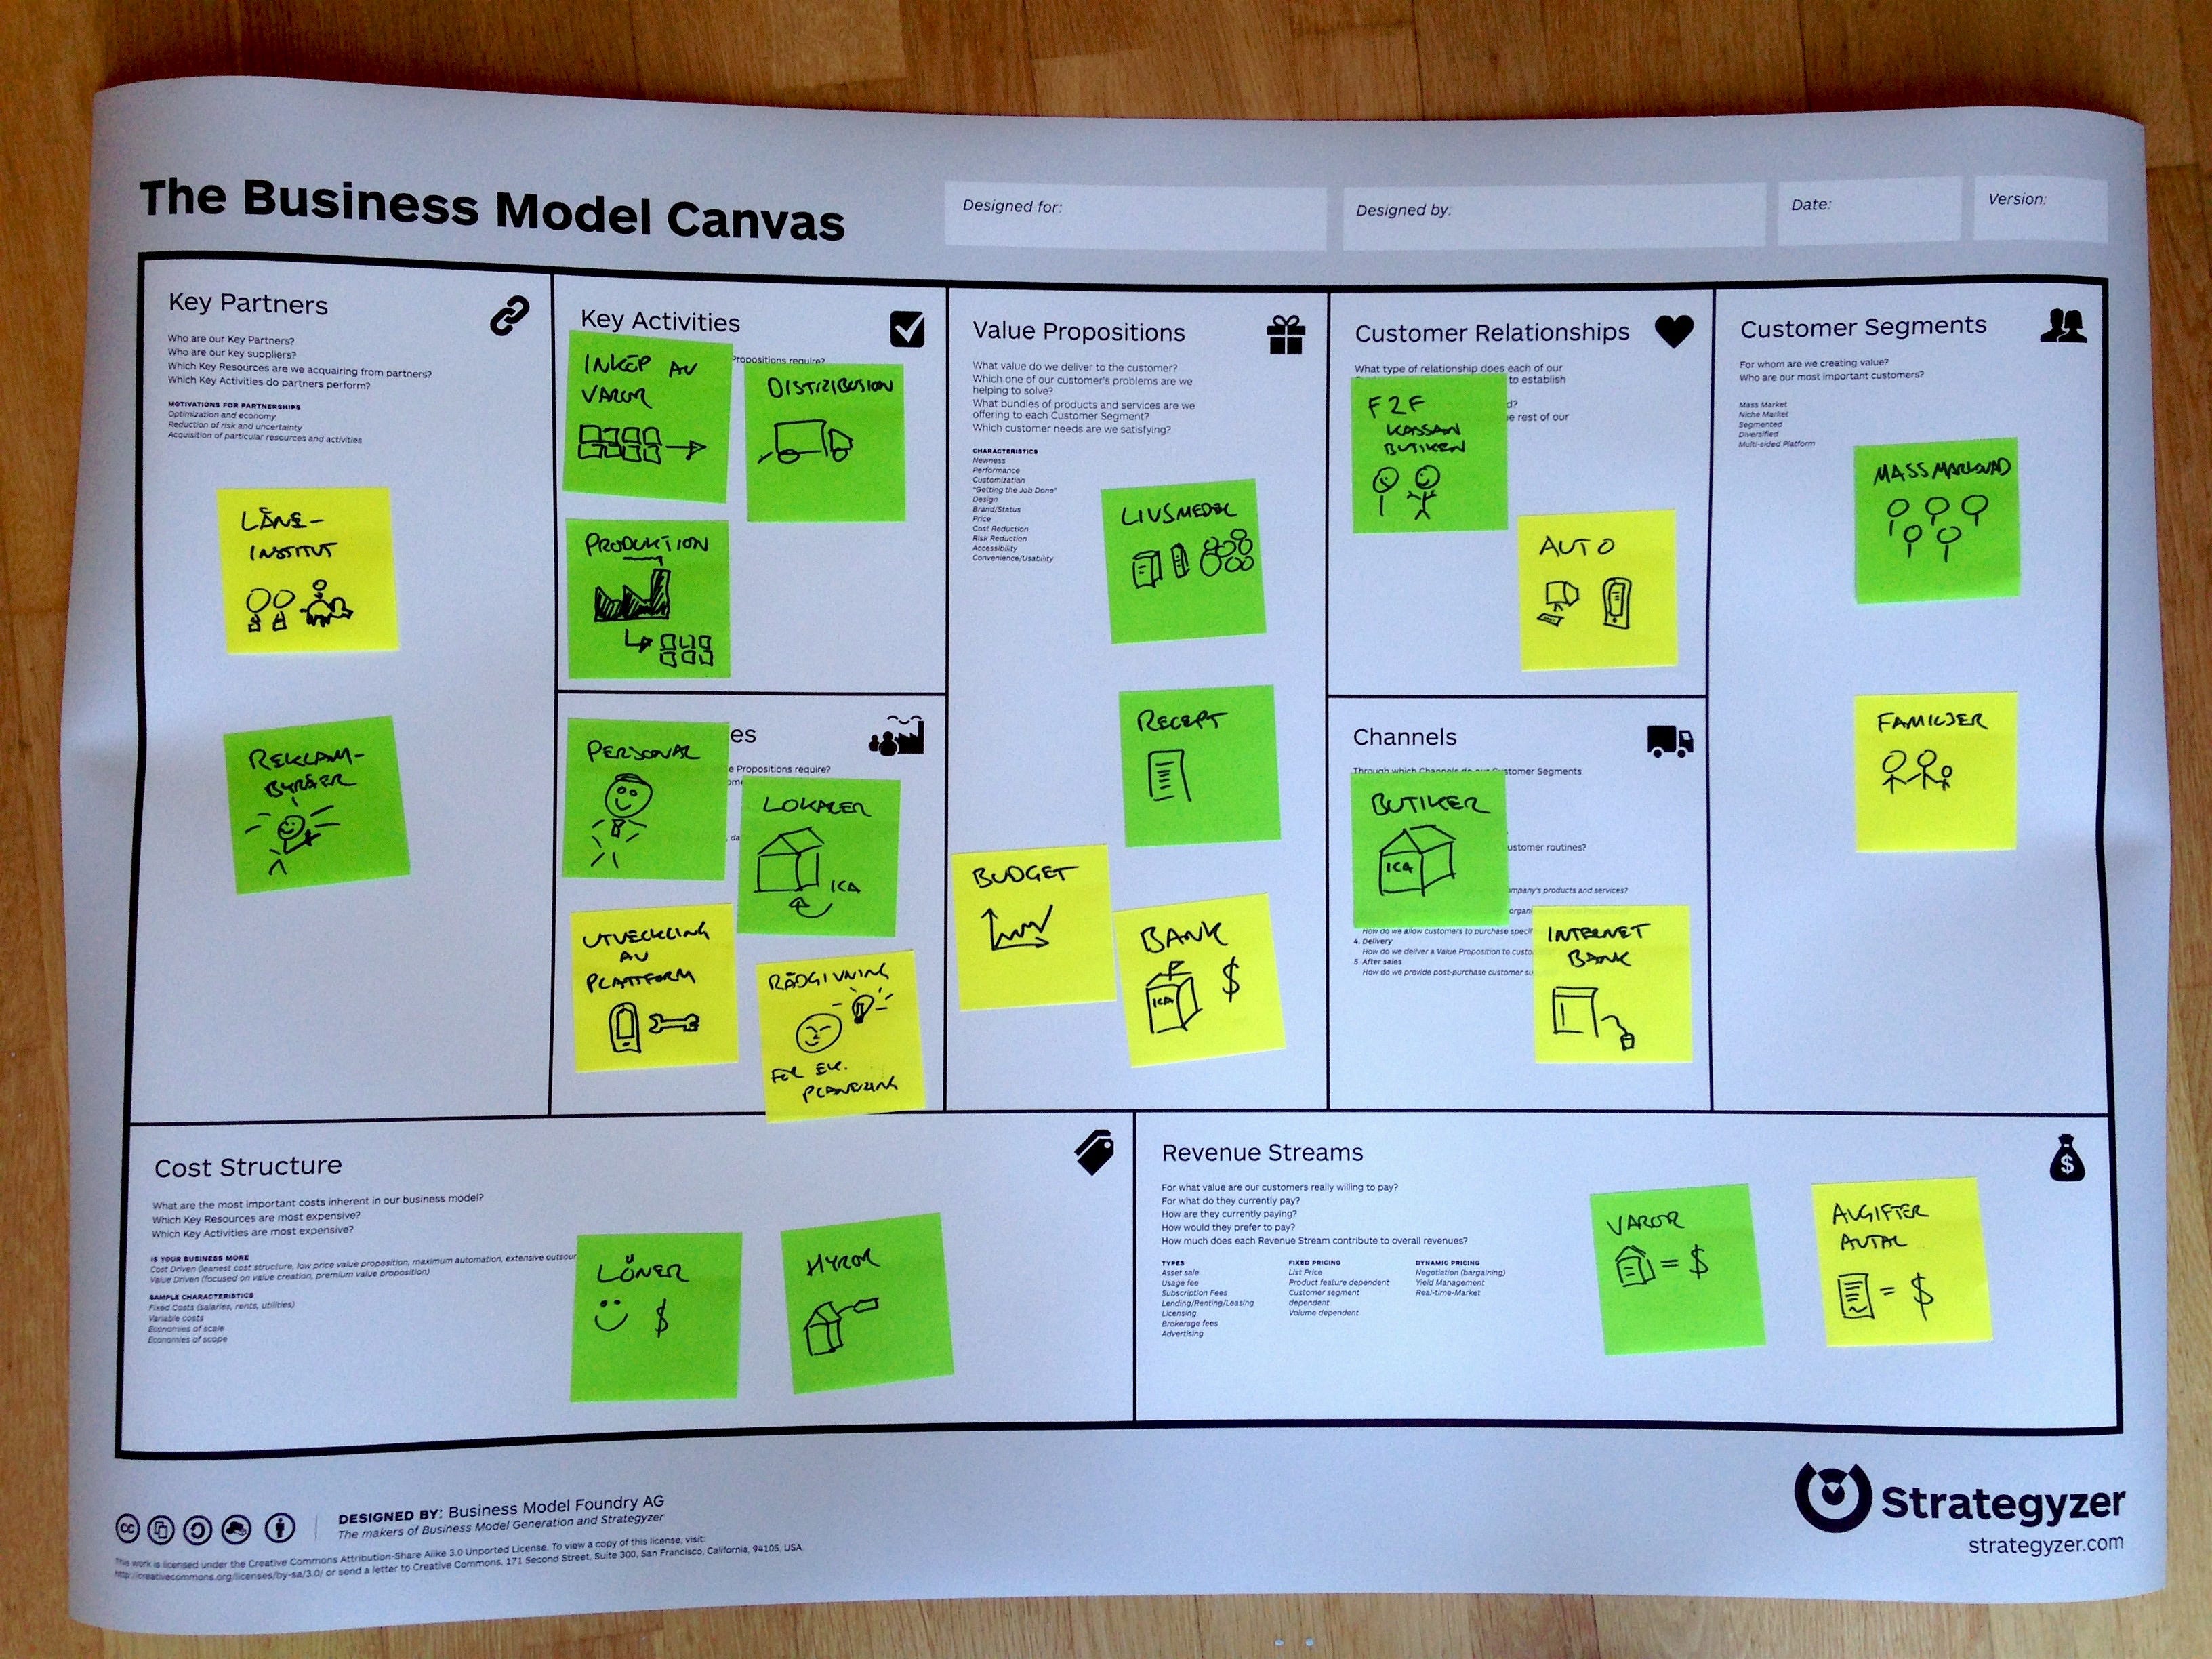 Why You Should Start The Customer Journey Work With A Business Model